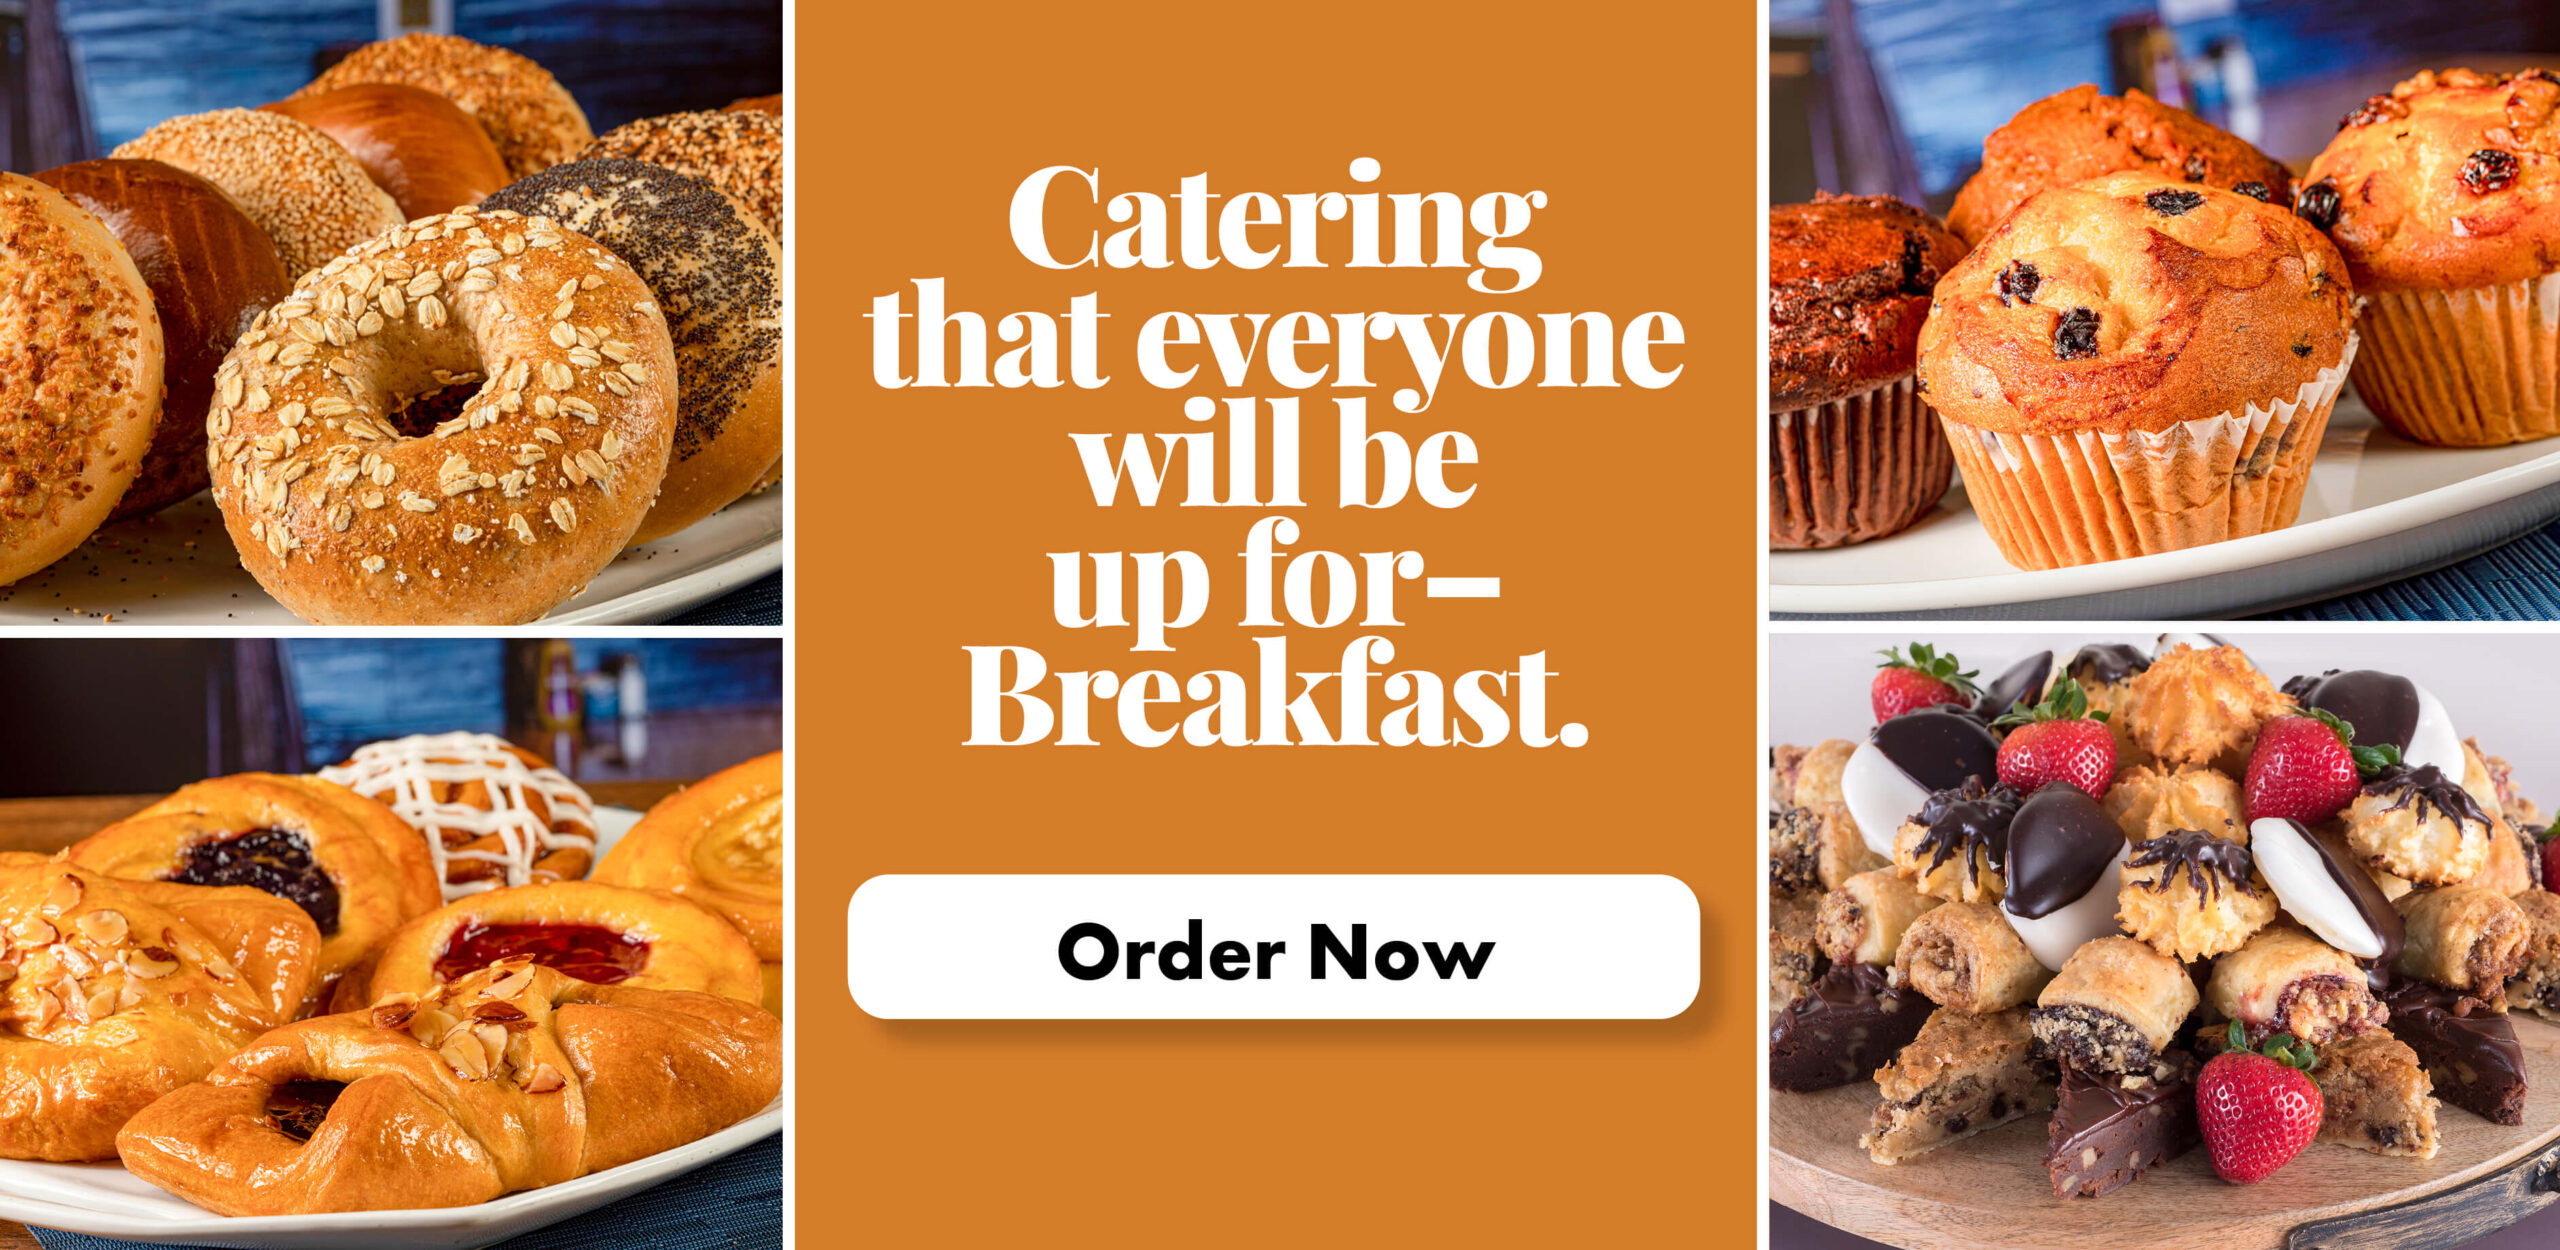 Catering that everyone will be up for--Breakfast. Click for details.